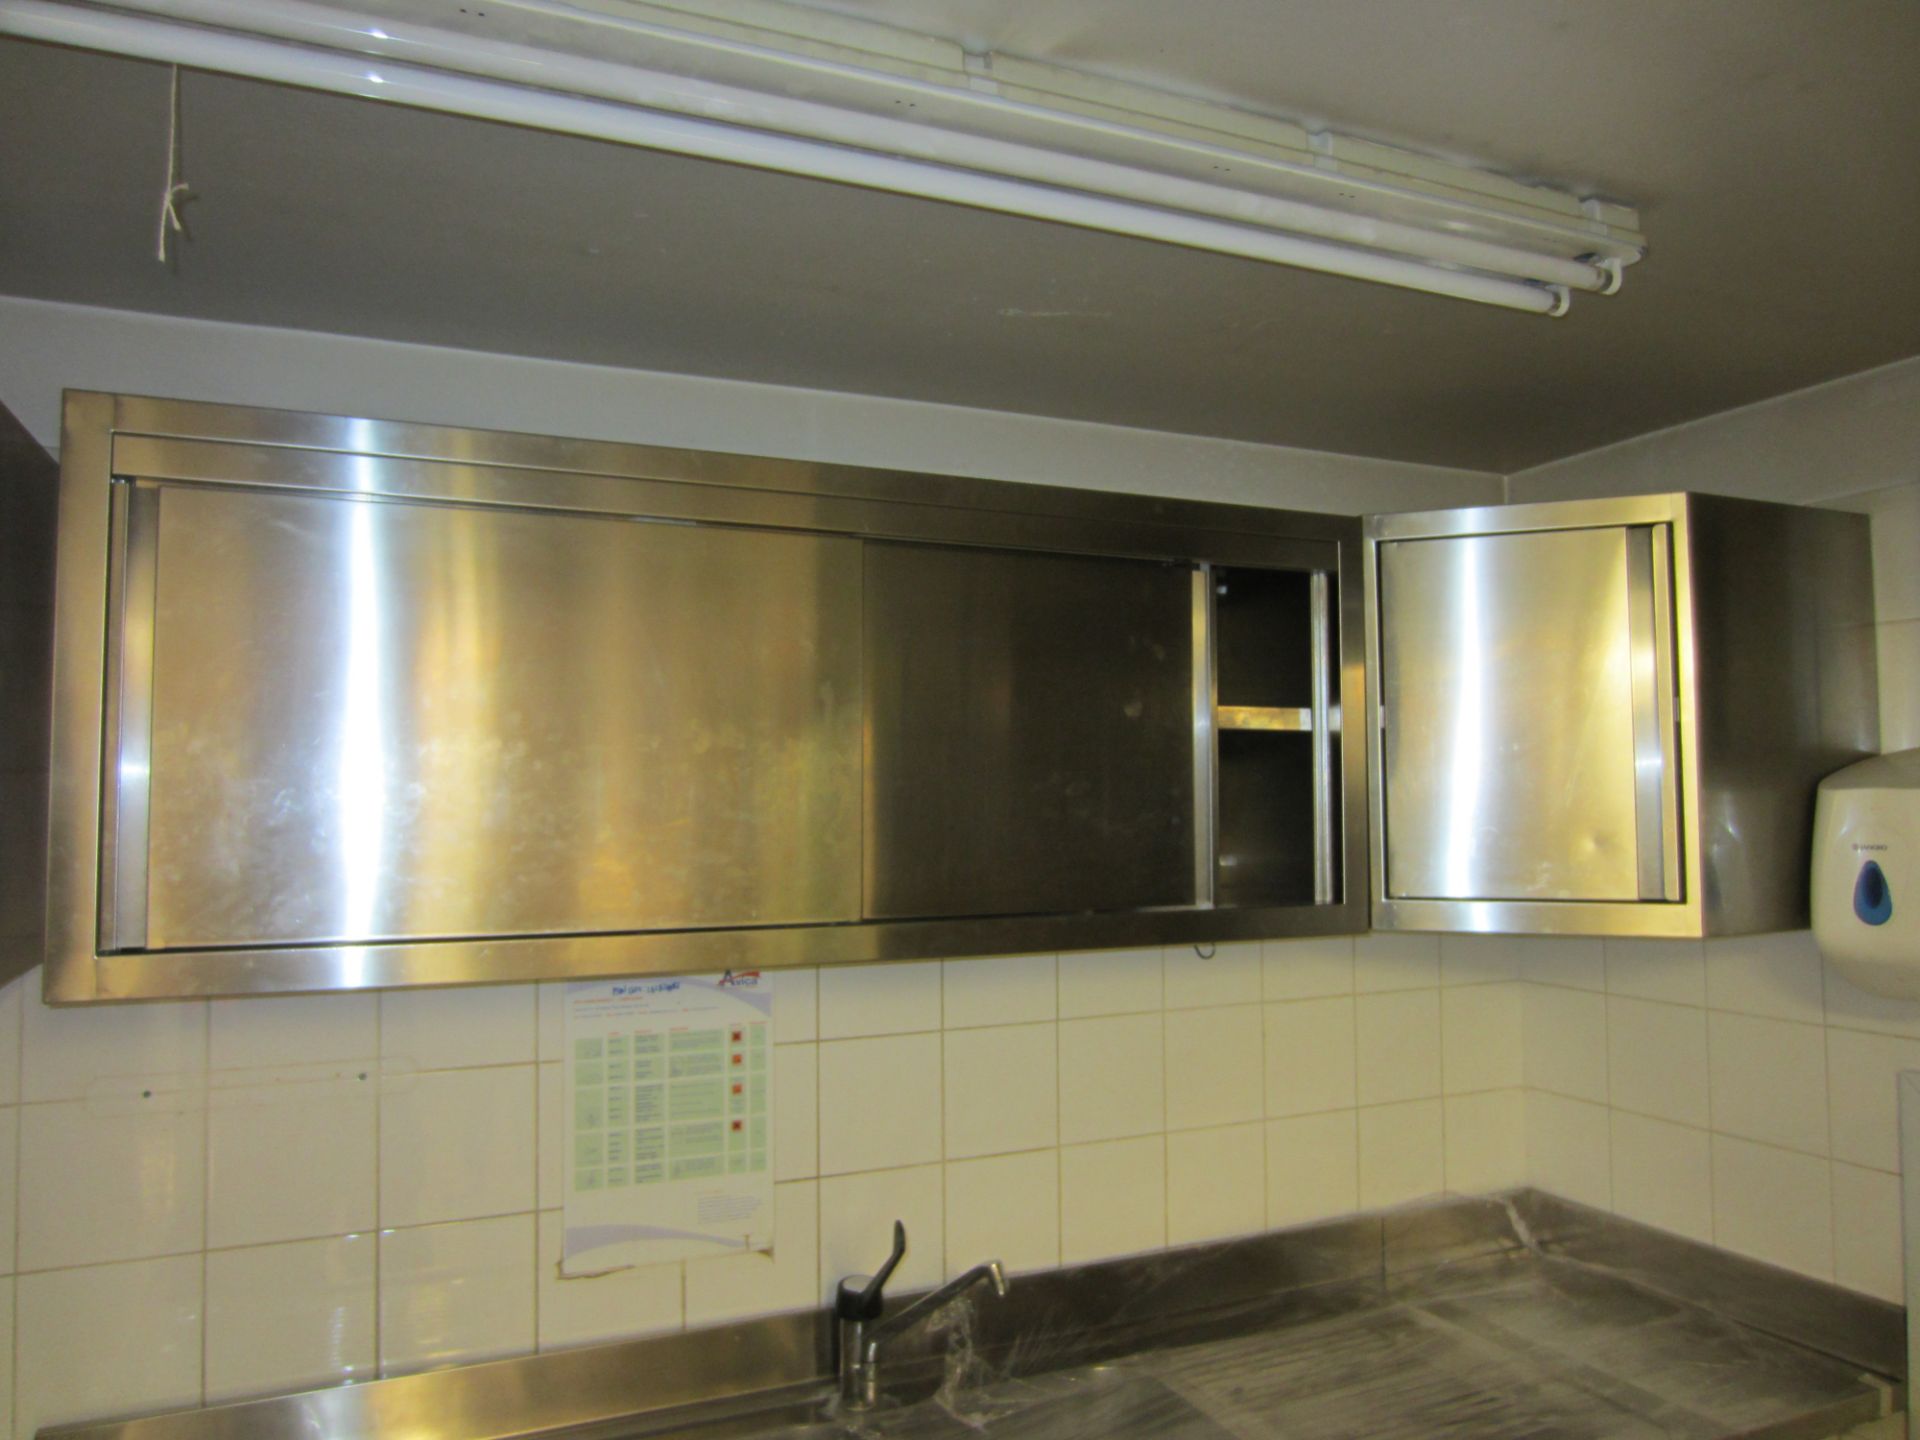 Two Stainless Steel Wall Mounted Fitting Wall Cupboards With Sliding Doors & Two Corner Cupboards - Image 2 of 2